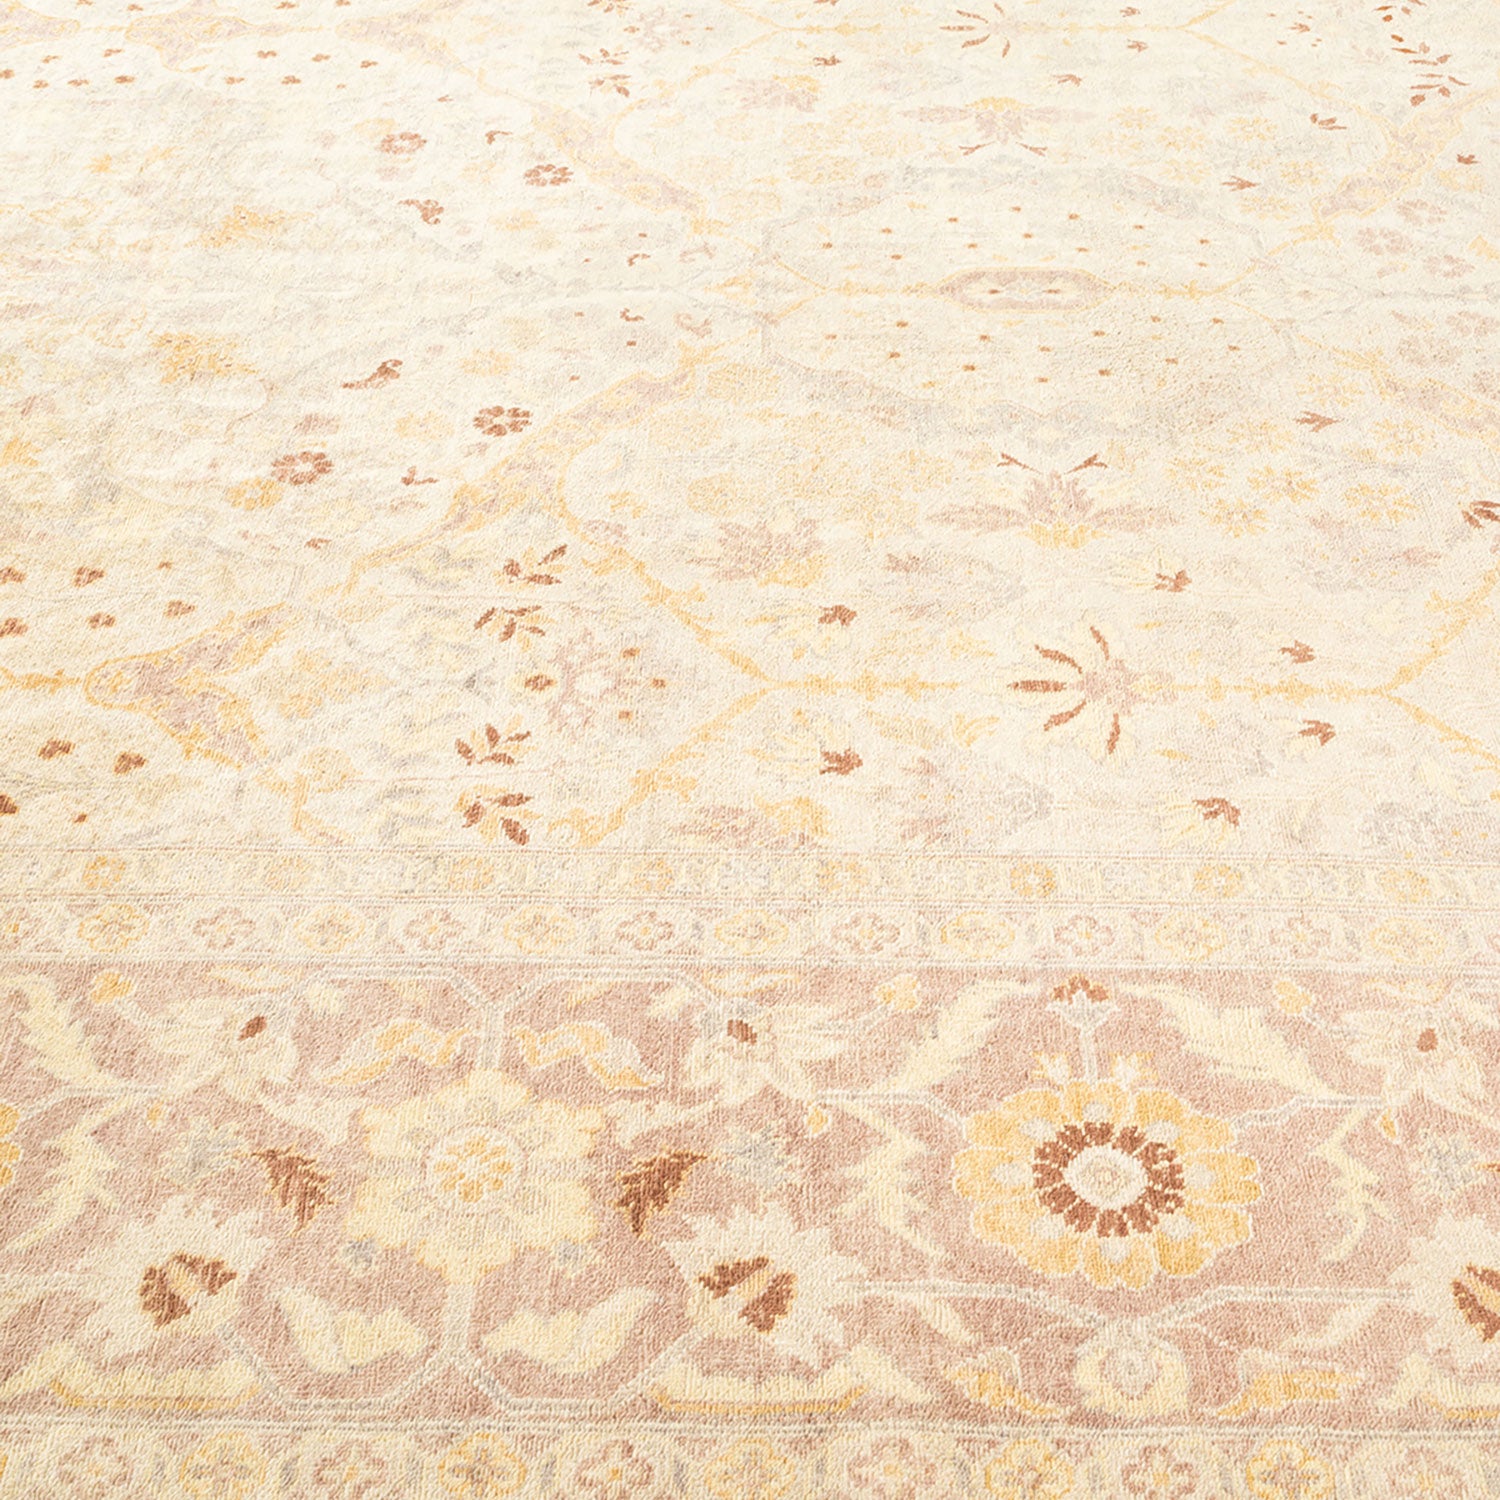 Close-up view of a floral-patterned carpet with soft colors.